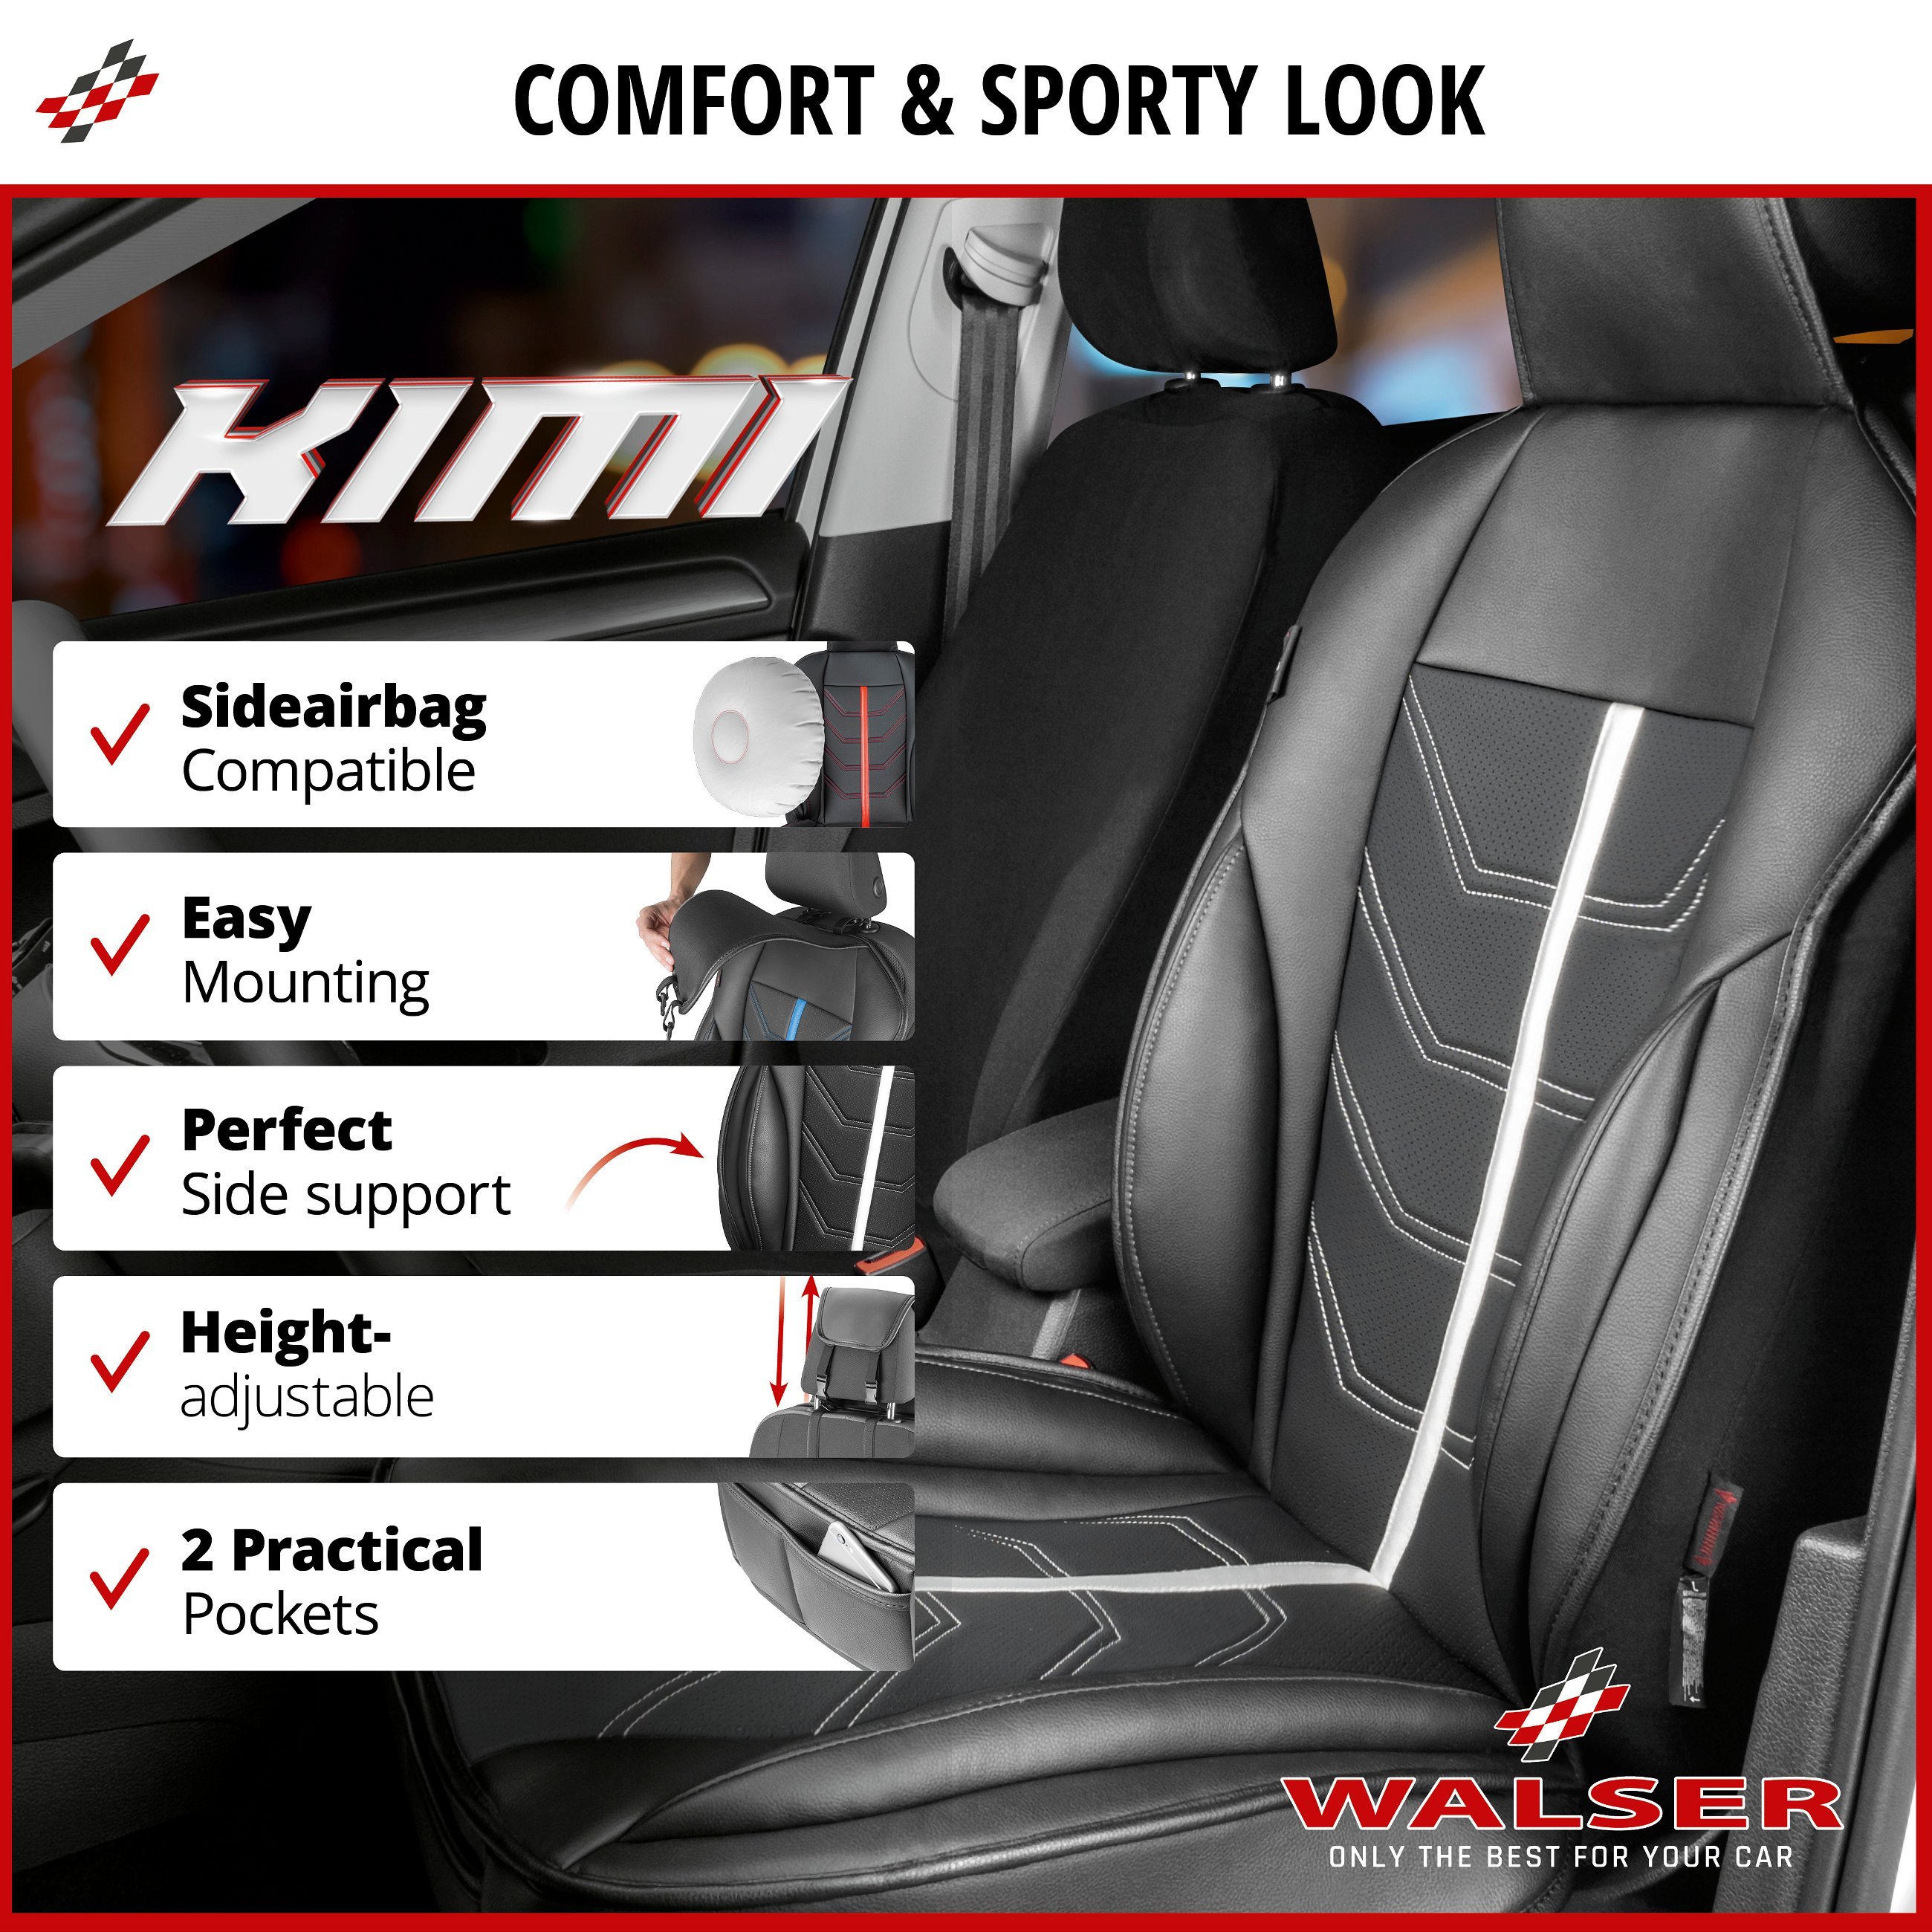 Car Seat cover Kimi, seat protector for cars in racing look black/silver